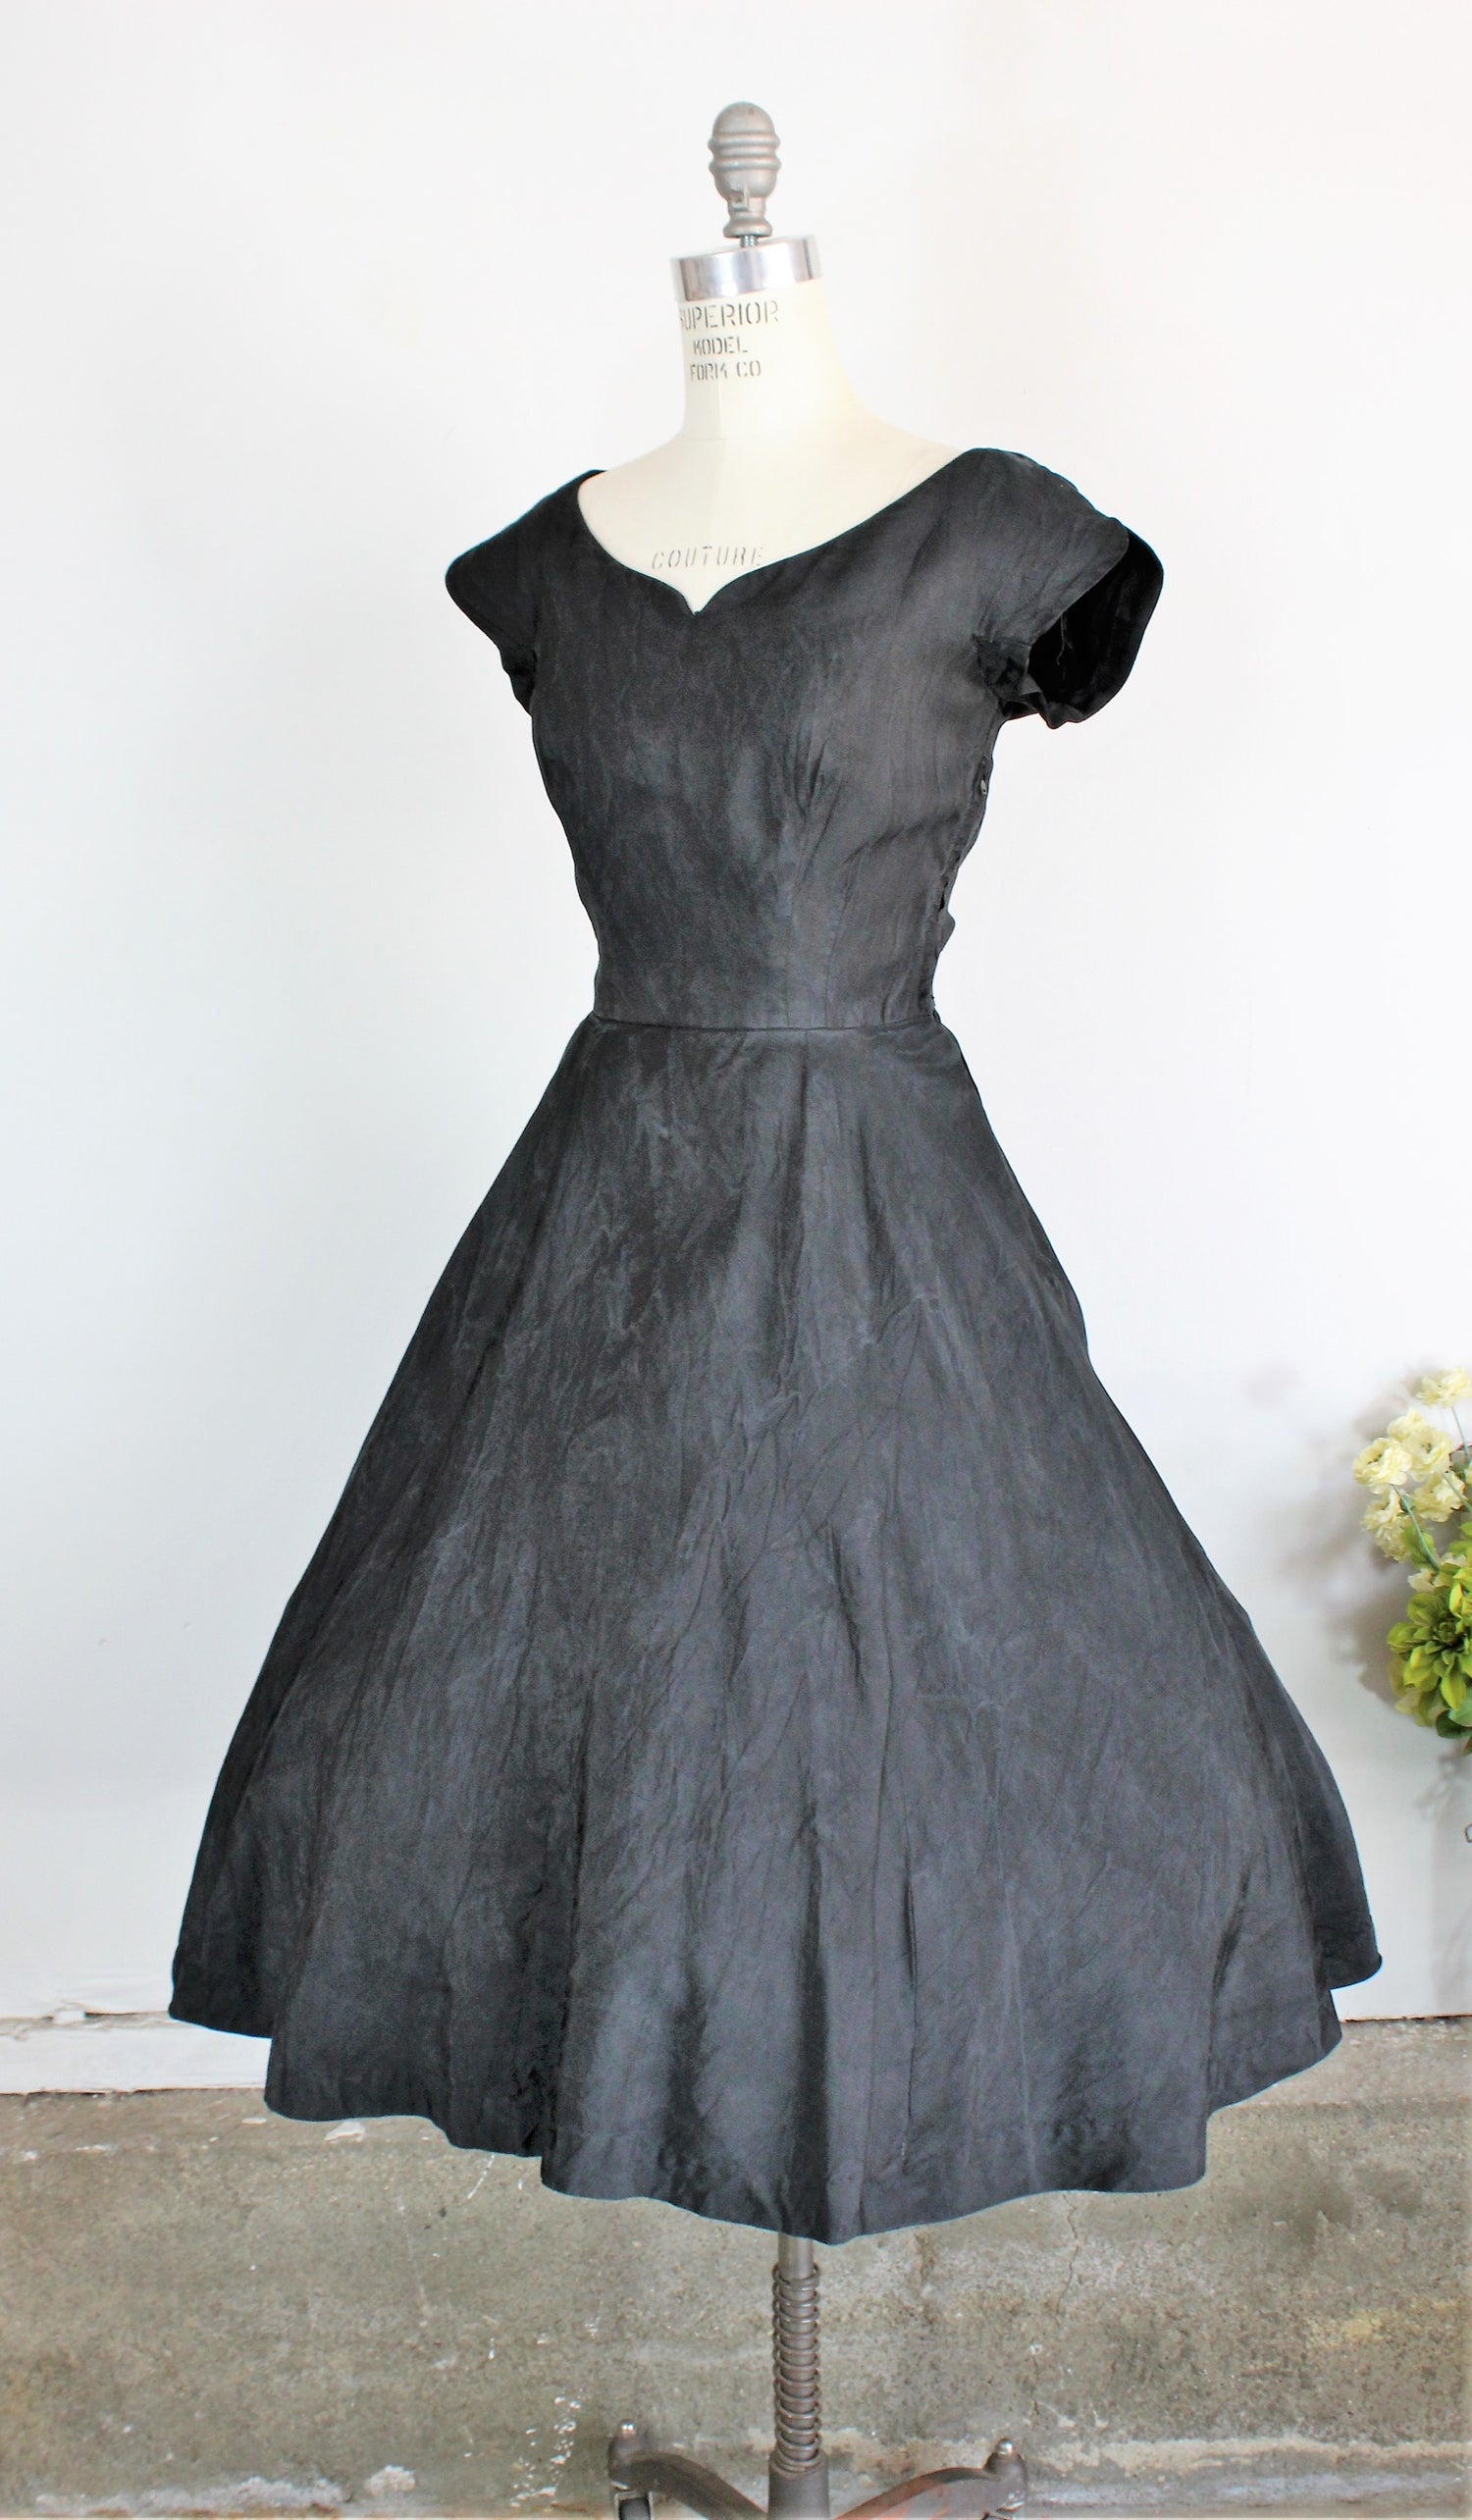 Vintage 1950s Black Fit And Flare Dress With Pockets by Maurice Rentner